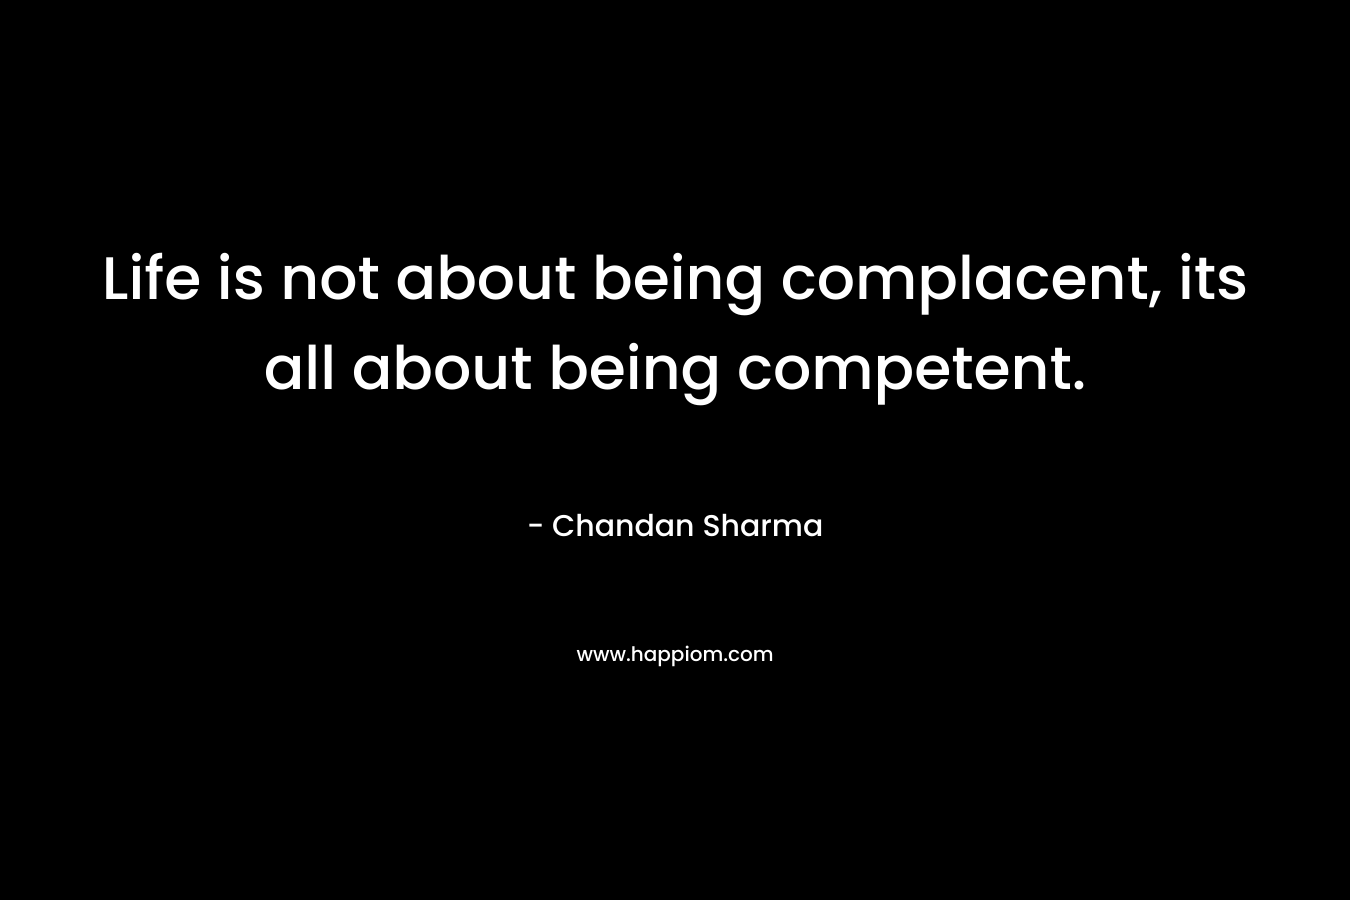 Life is not about being complacent, its all about being competent. – Chandan Sharma